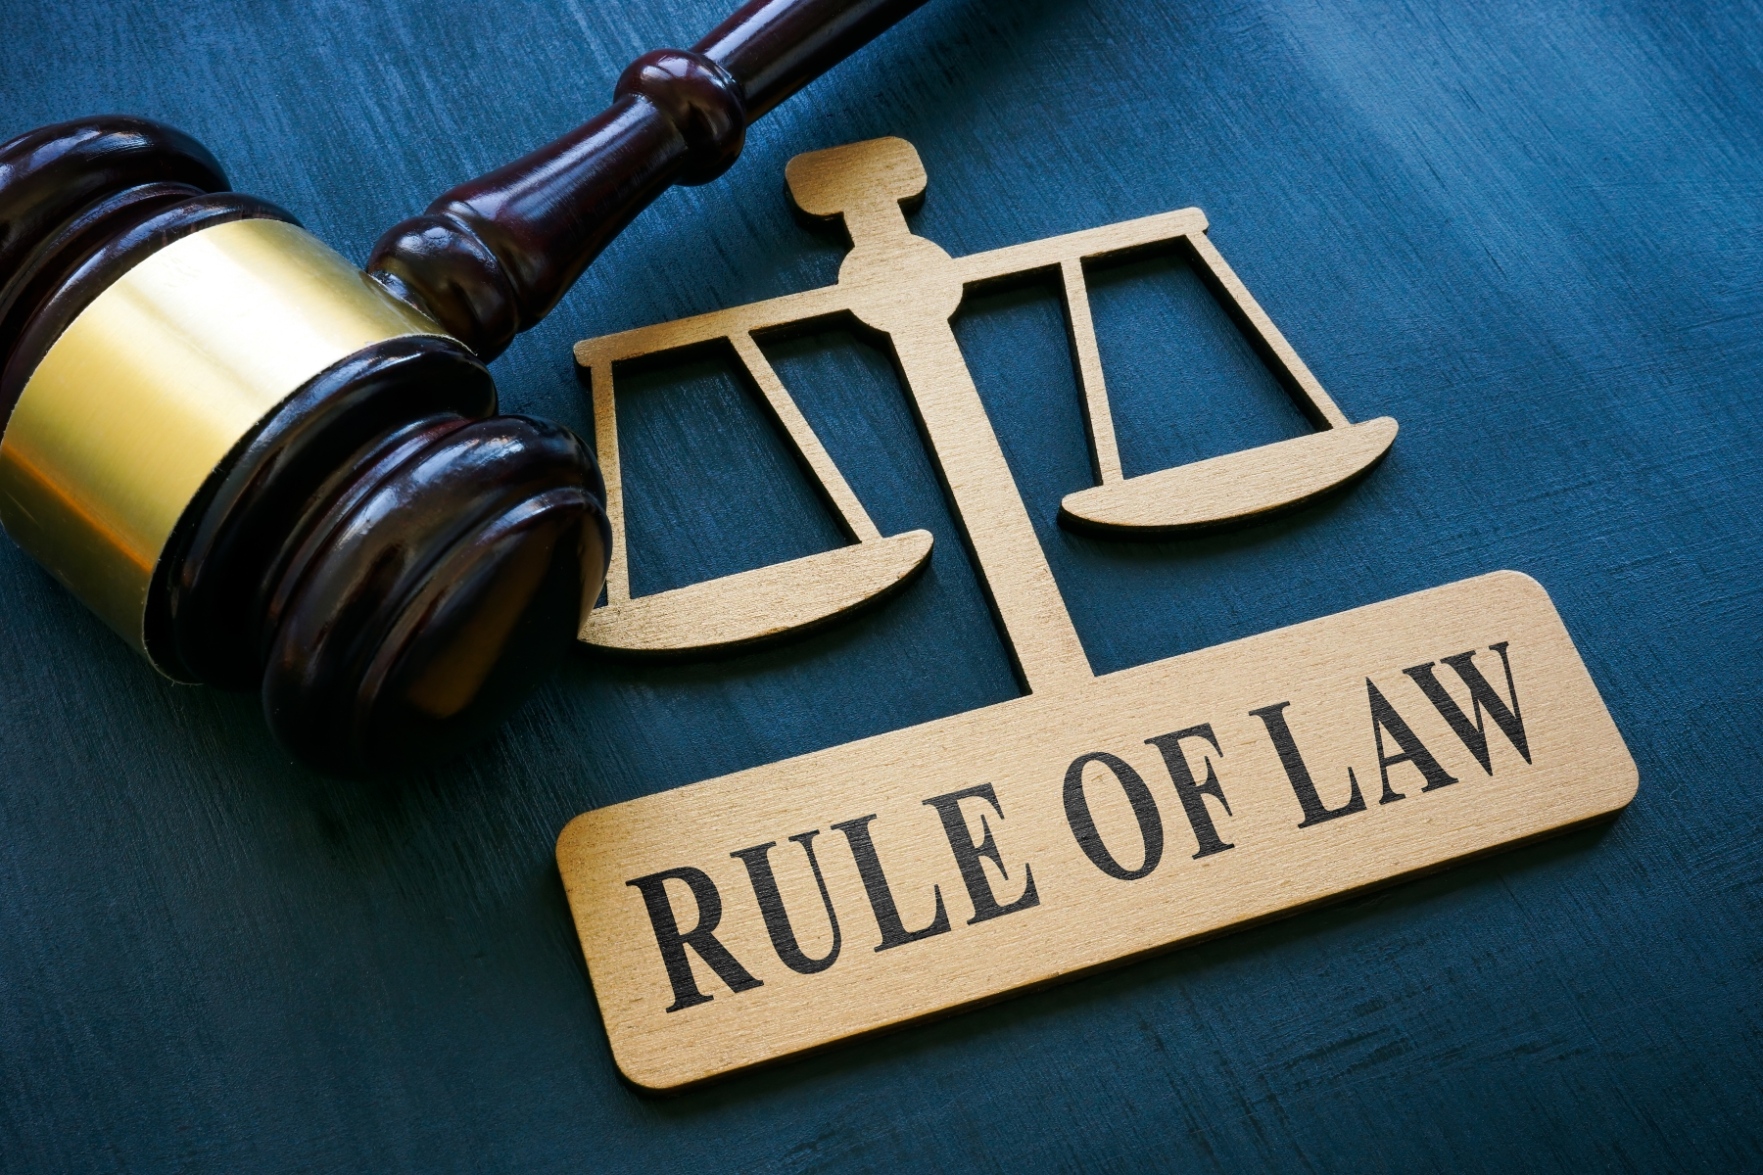 research topics on rule of law